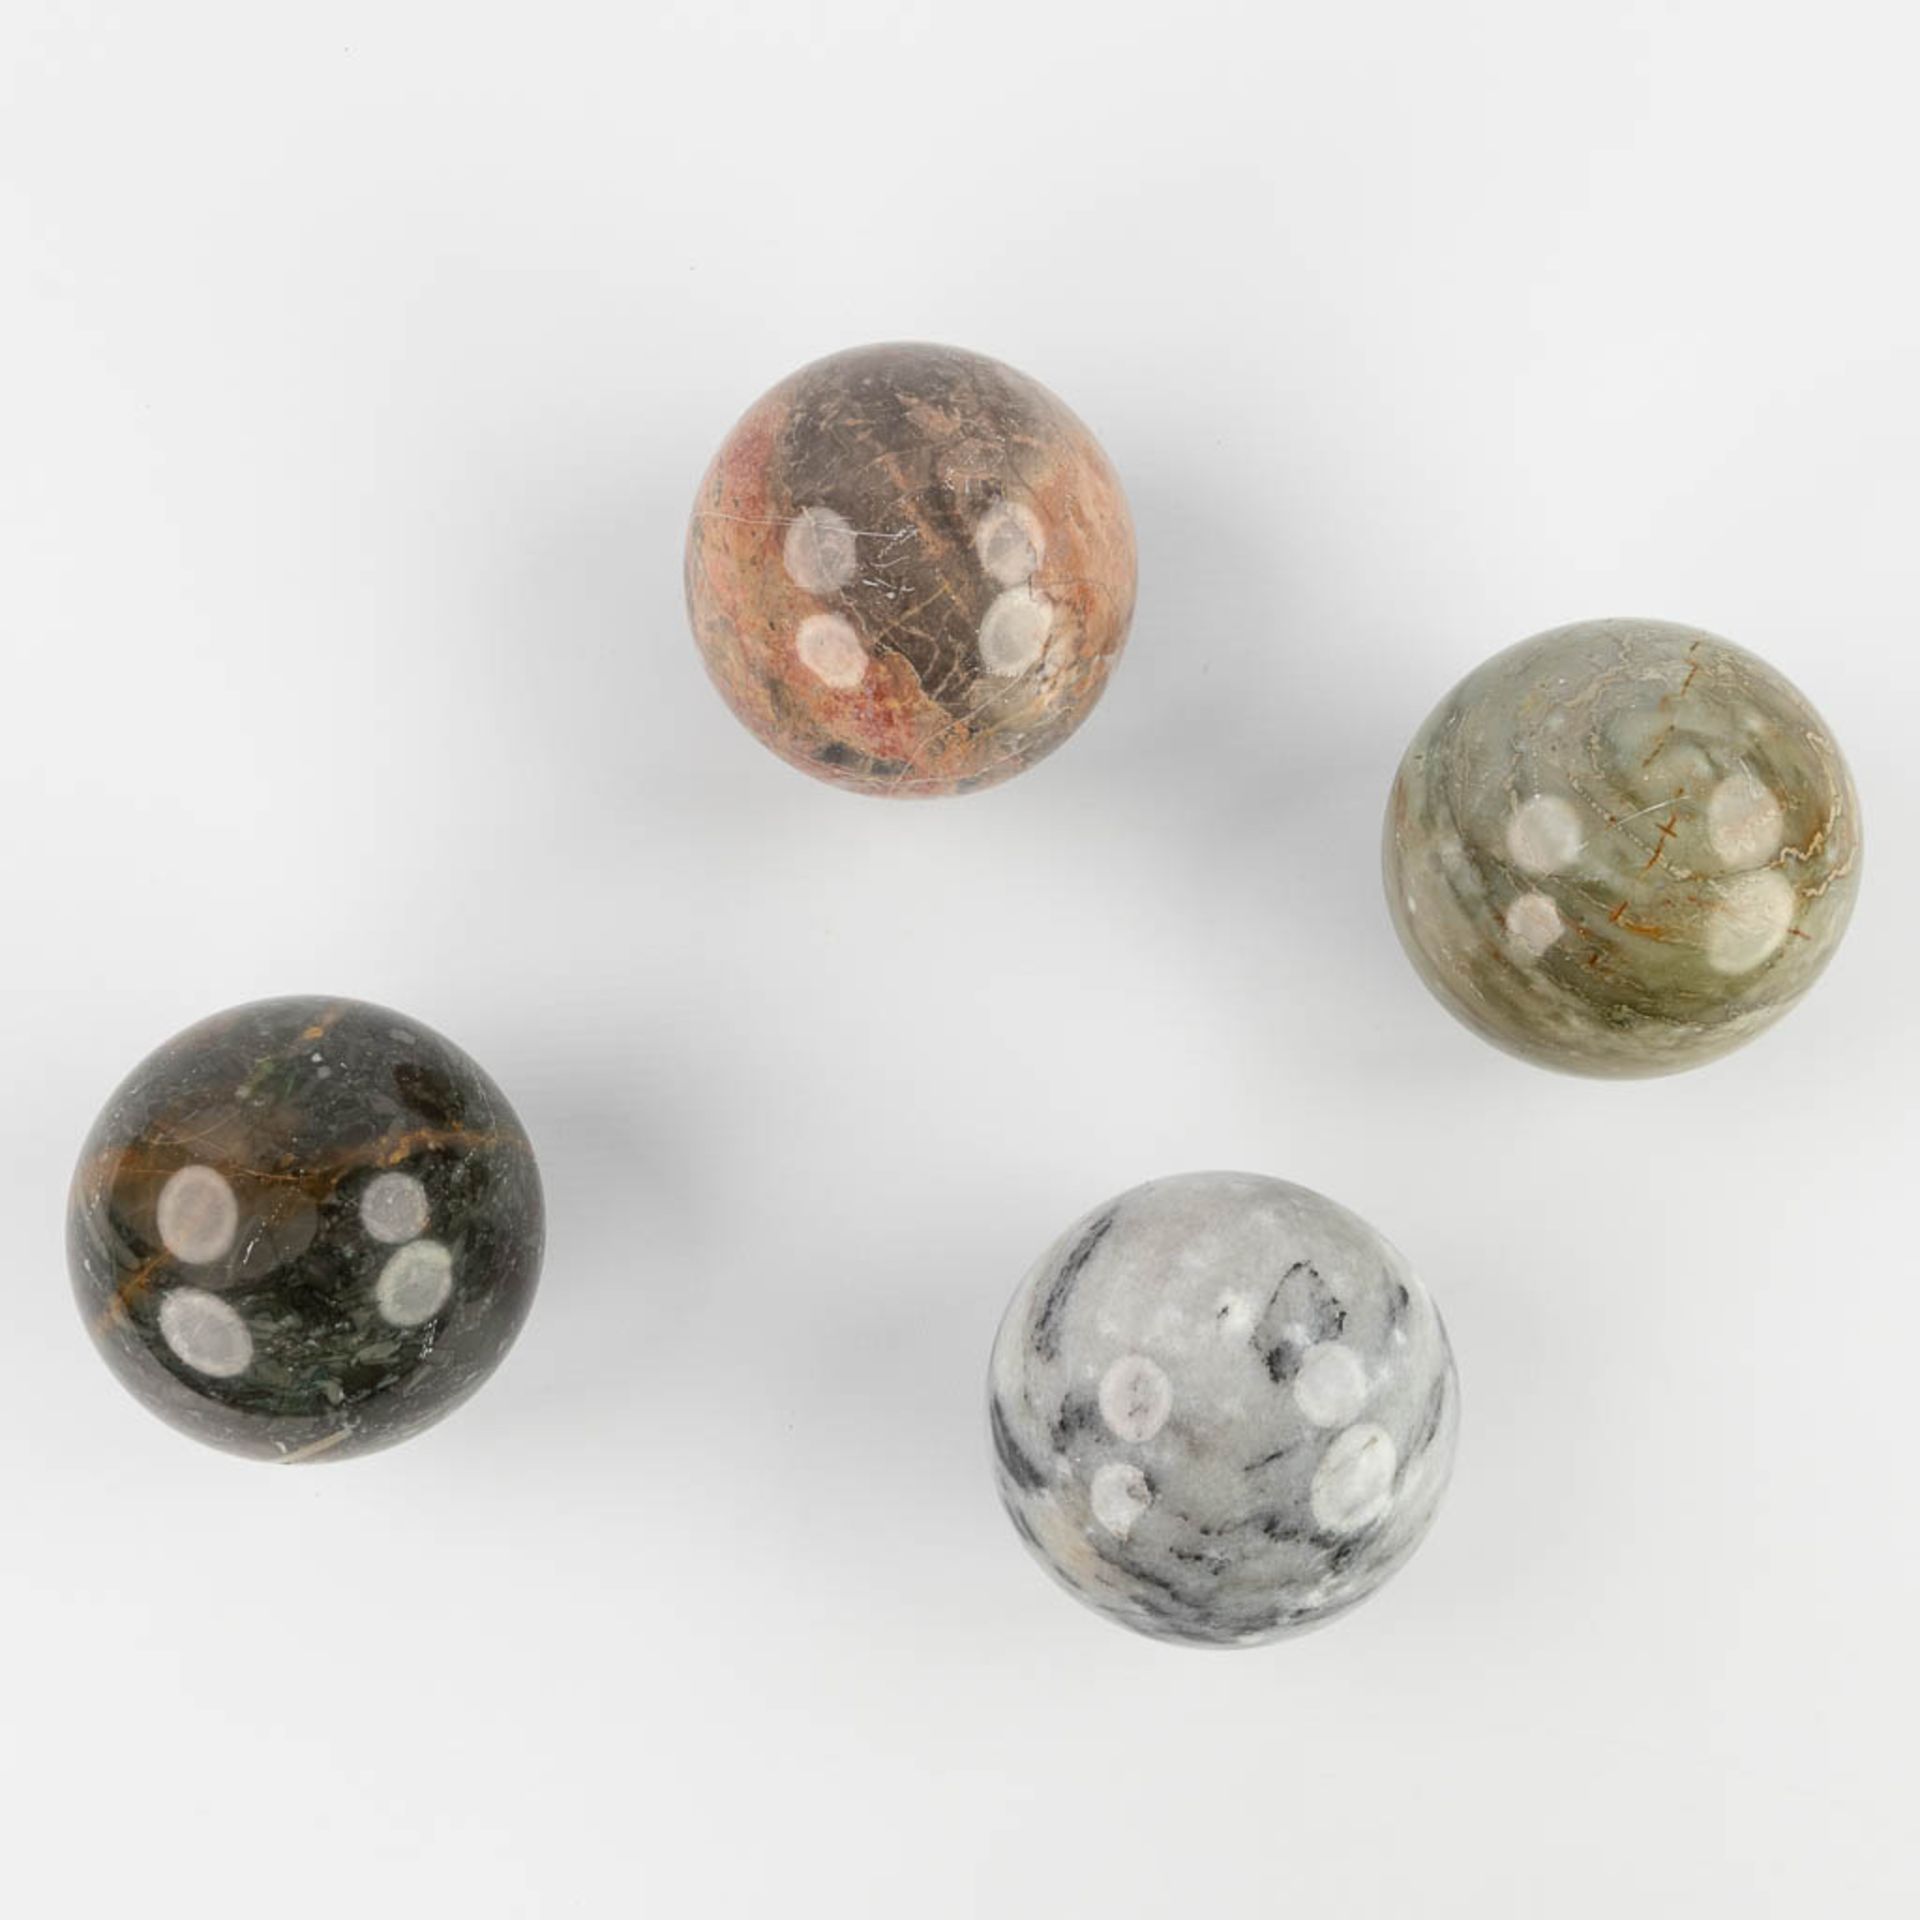 A set of 4 balls made of natural stone and marble. 20th century. (D: 9 cm)